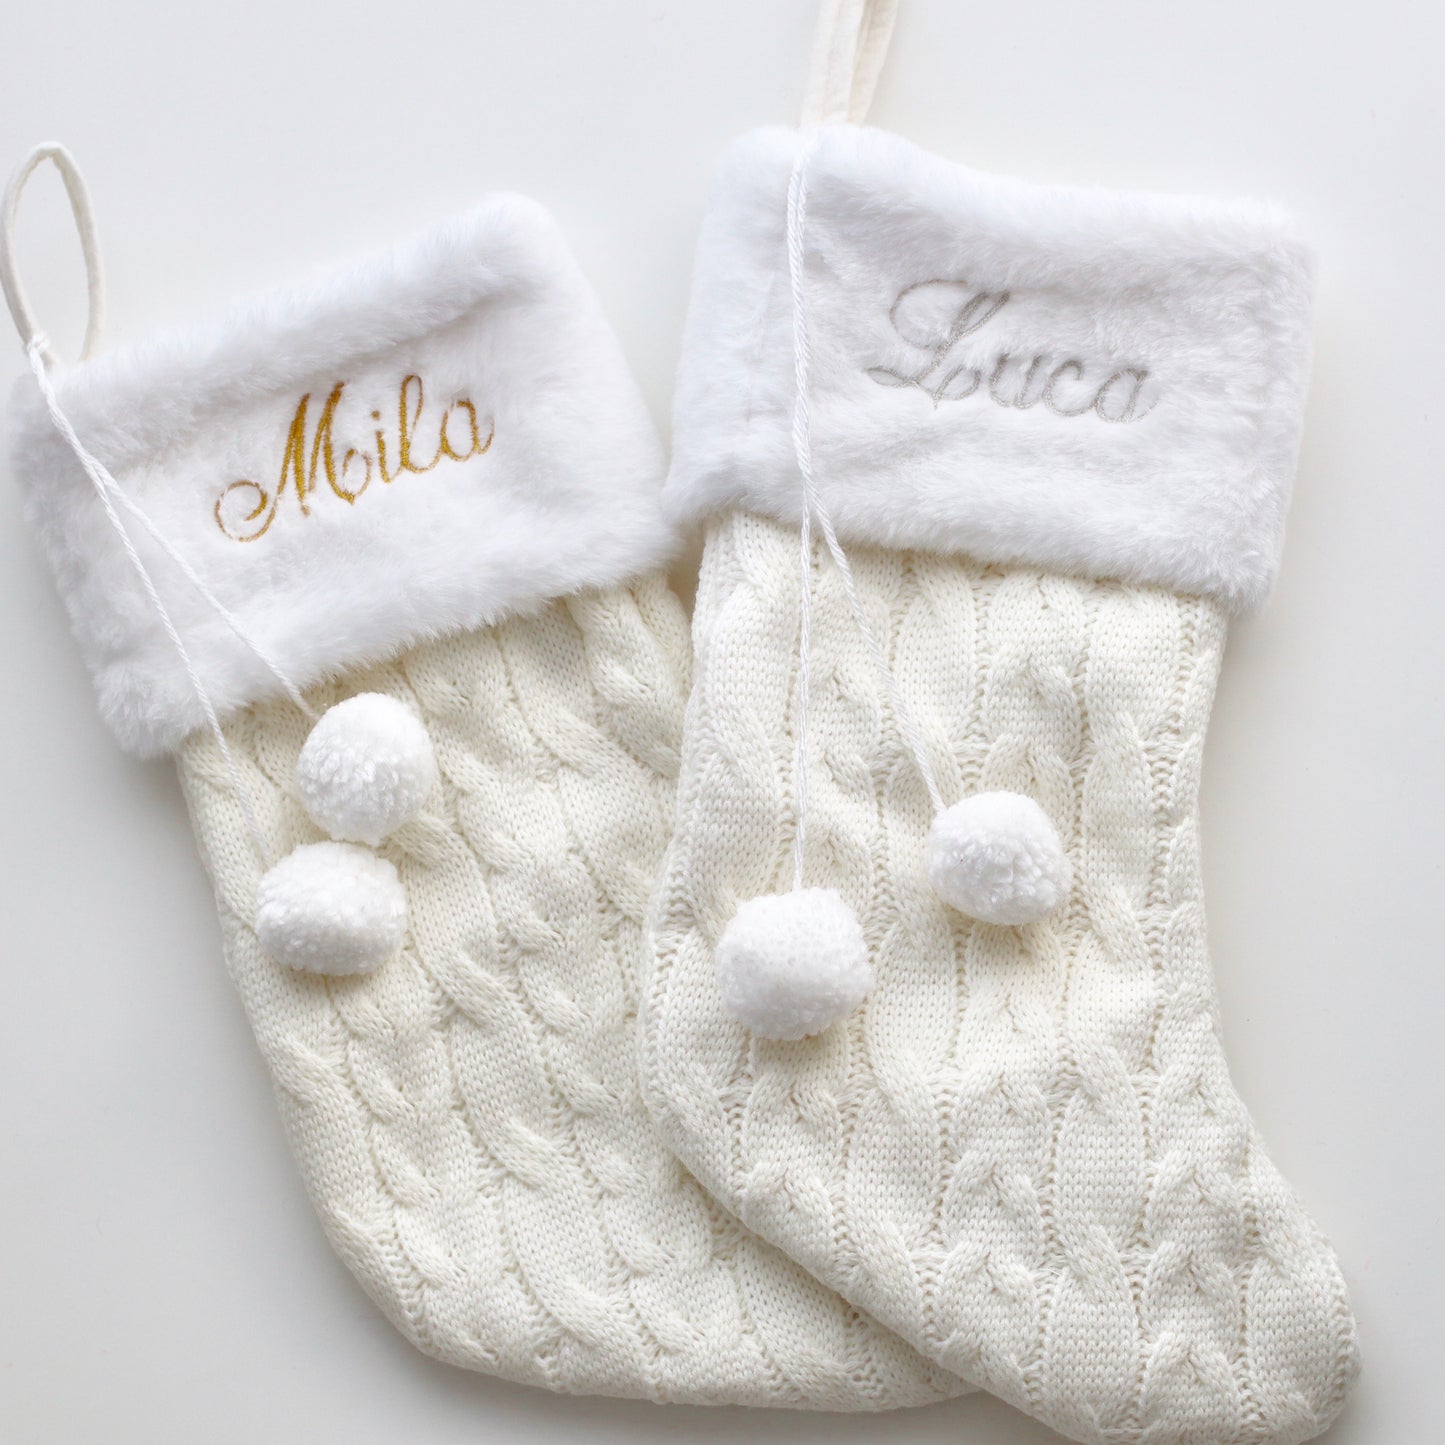 Our Knitted Personalised Christmas Stockings will come embroidered or have an acrylic letter or both!